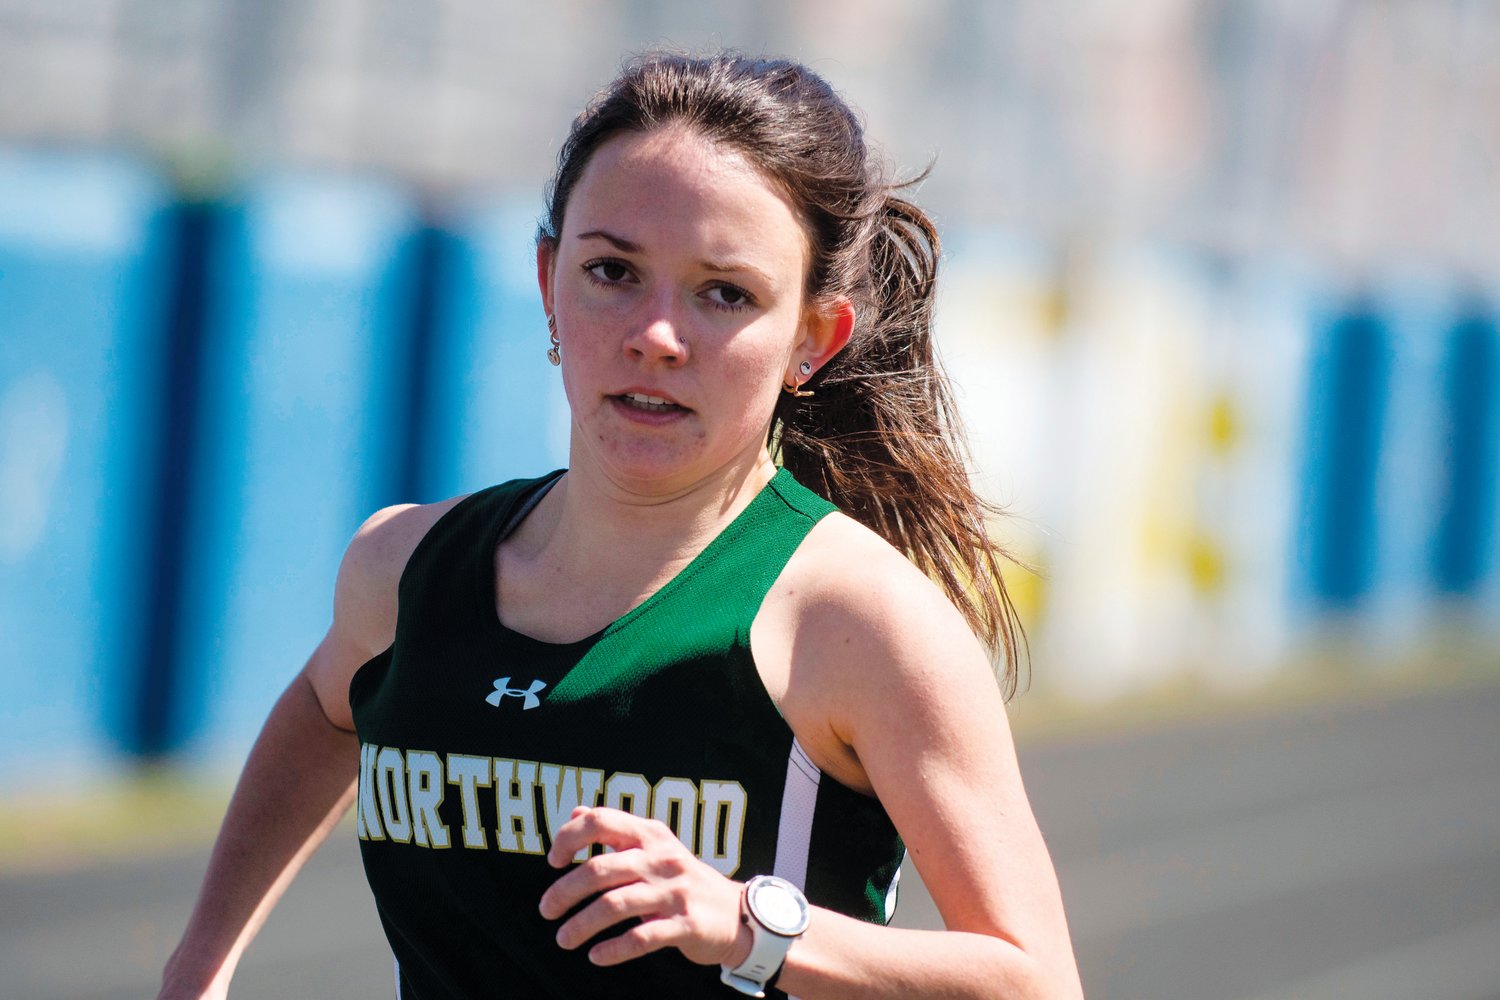 Northwood senior Caroline Murrell finishes first in the women’s 1,600-meter run at.the Chatham County Invitational on Saturday. Murrell placed first in all three of her distance events and hasn't lost a race all season.